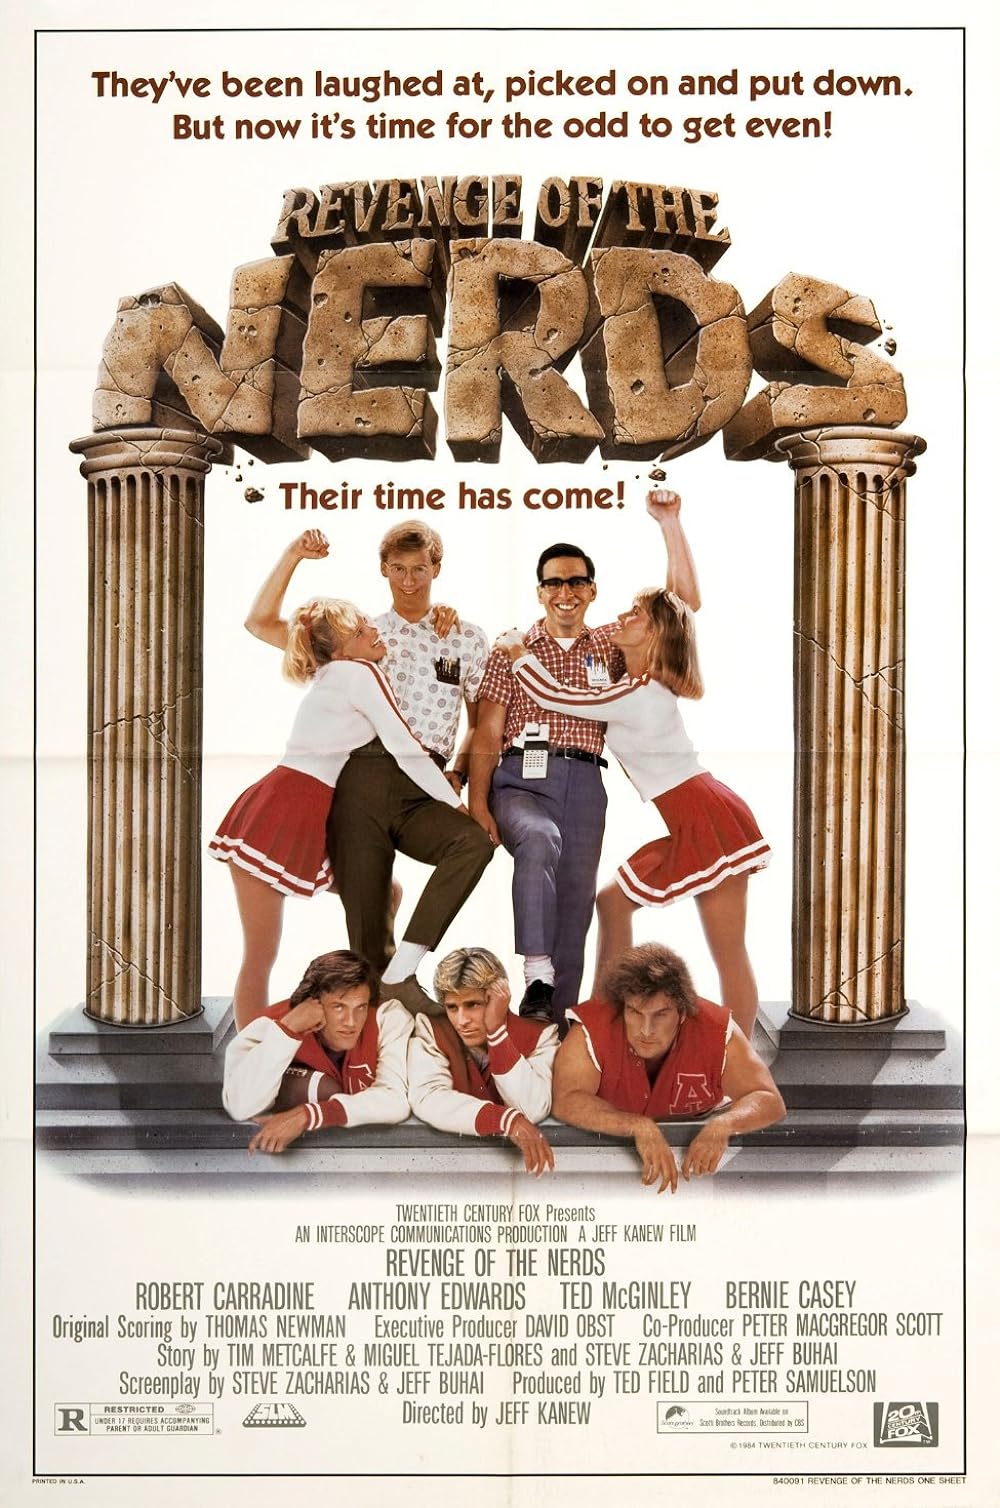 denis costello recommends a nerds sweet revenge pic